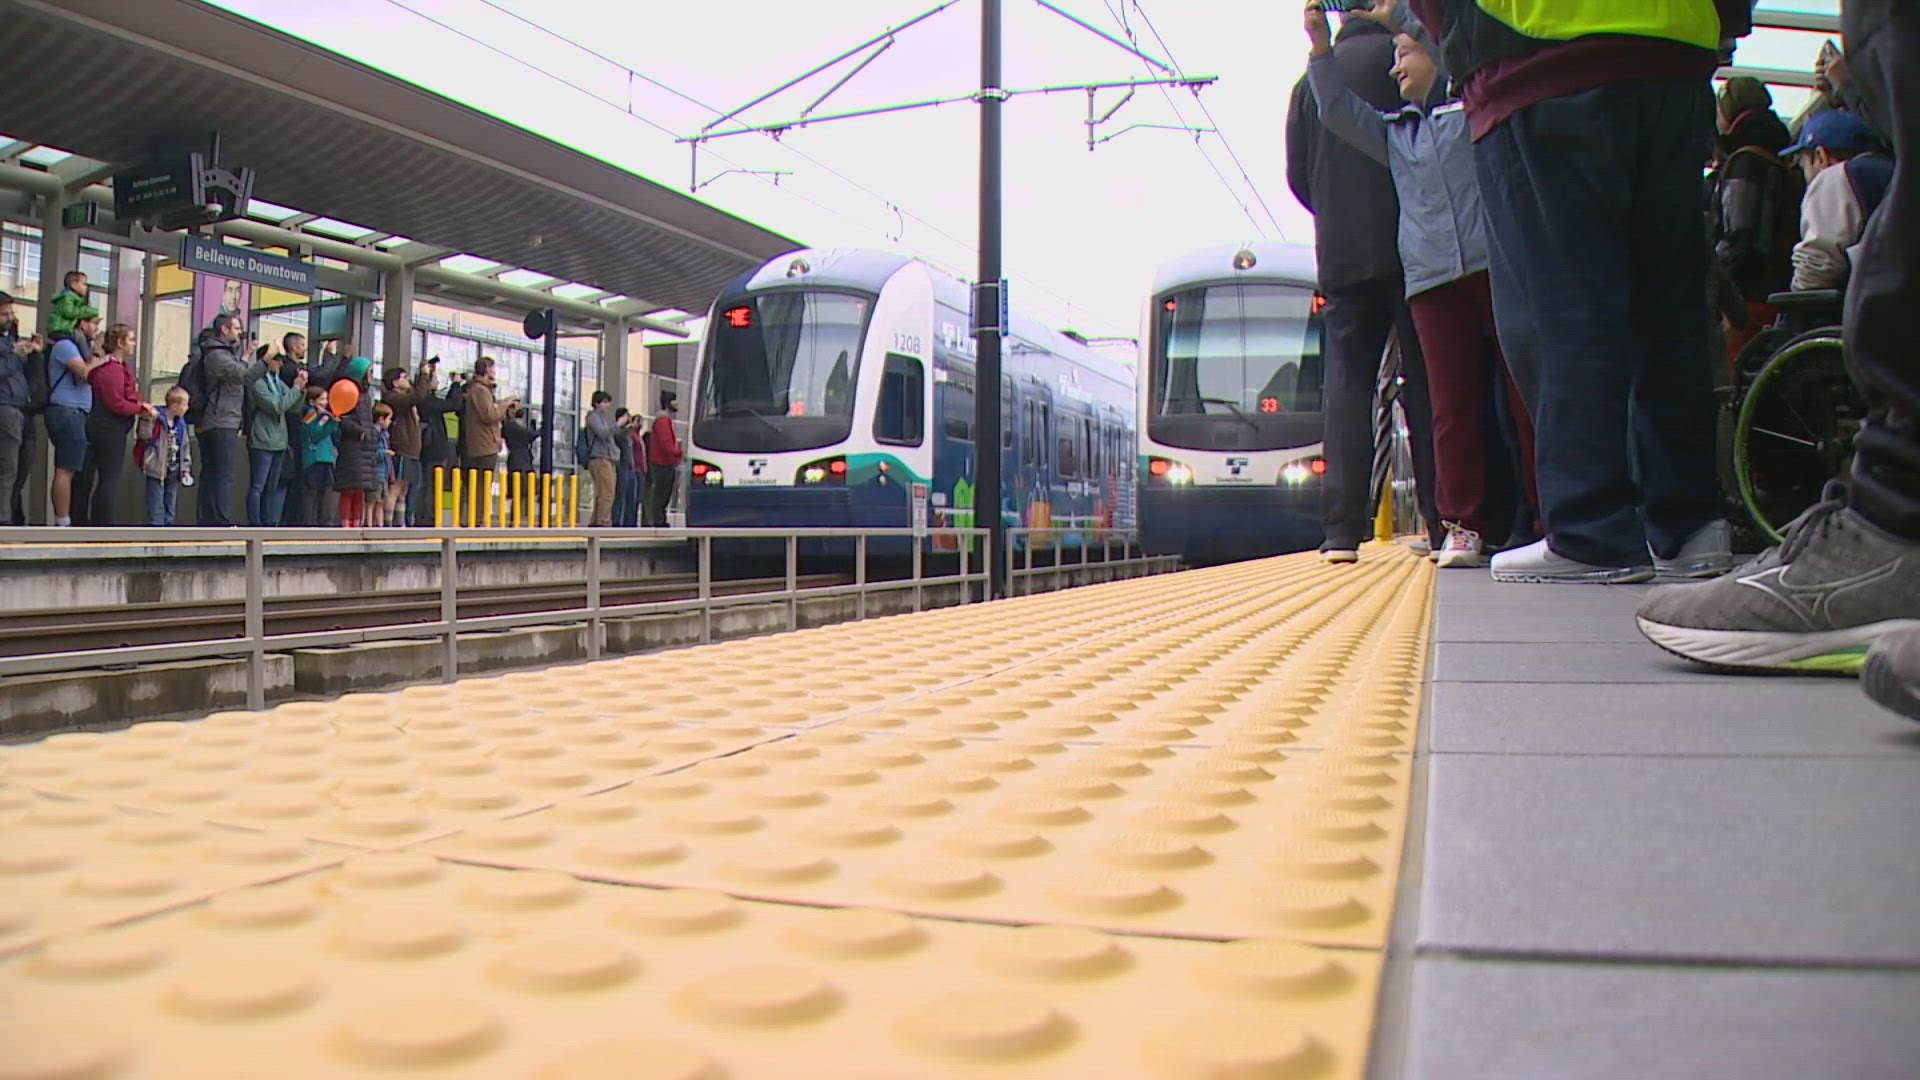 The new "Eastlink Starter Line" is open for riders and is just the beginning in a series of light rail expansions